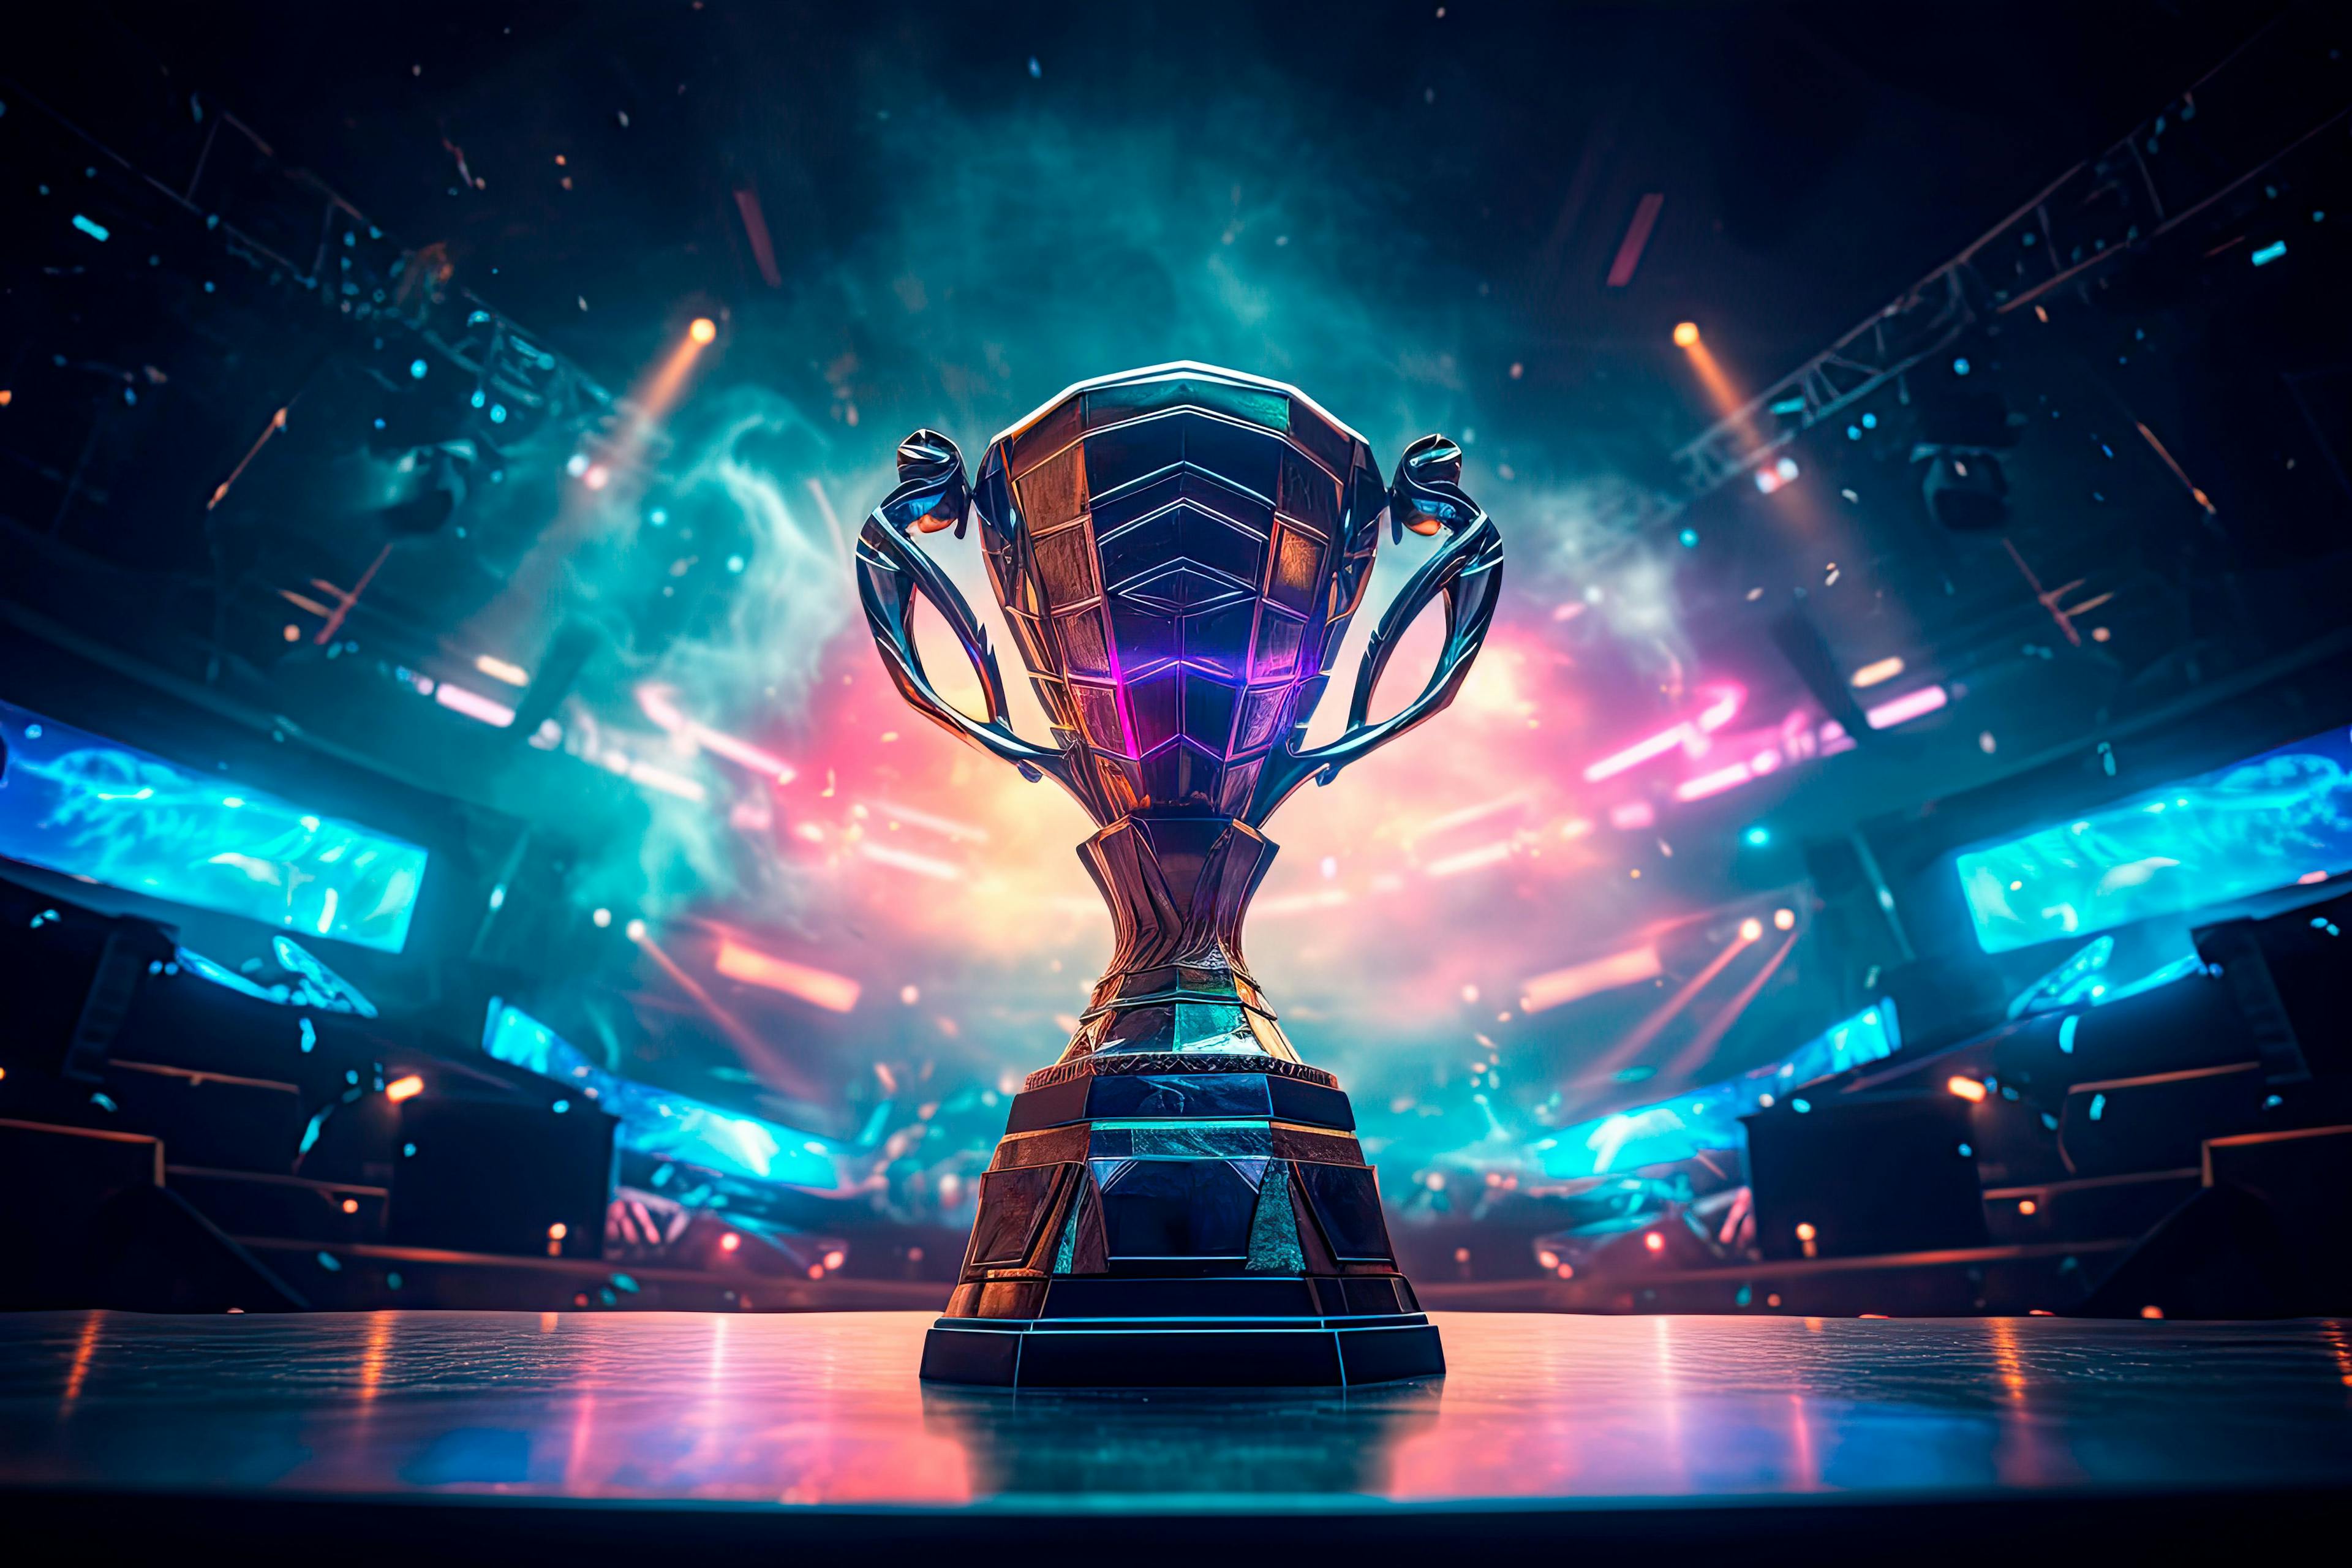 The esports winner trophy standing on the stage in the middle of the arena of the computer video game championship. Two rows of PCs for competing teams. Stylish neon lights with a cool design. | Image Credit: © Александр Марченко - stock.adobe.com. 